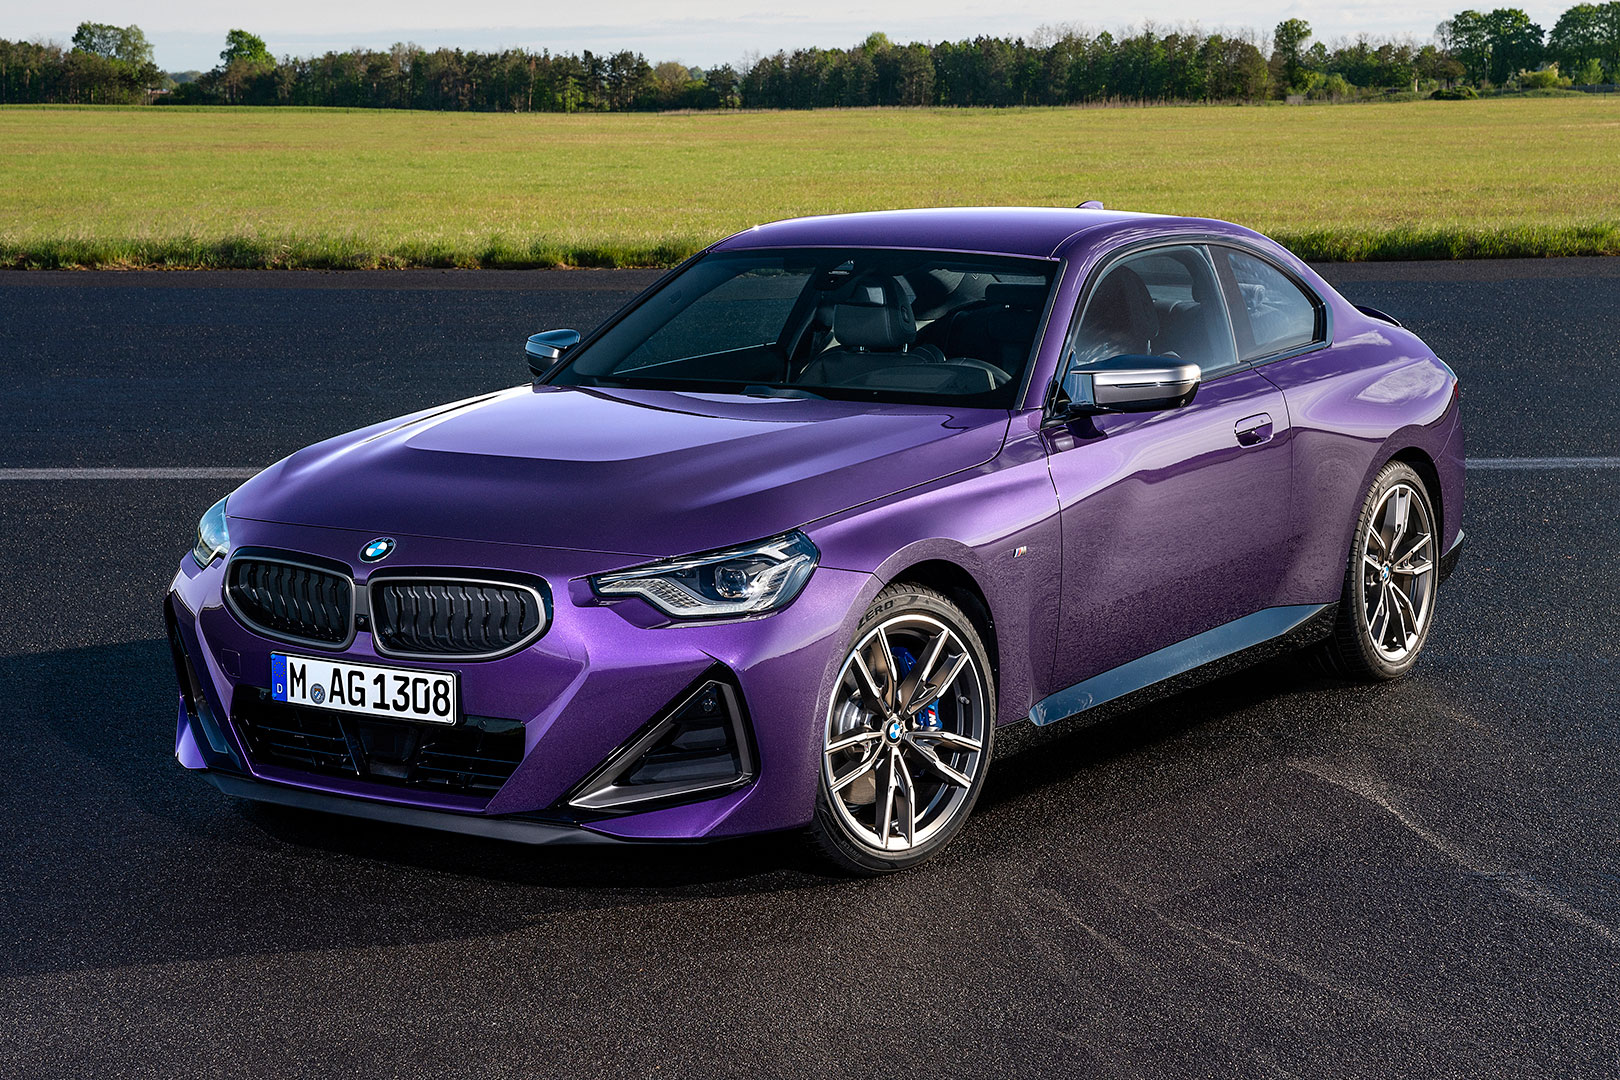 https://motoringworld.in/wp-content/uploads/2021/07/BMW-2-Series-Coupe-front-static.jpg